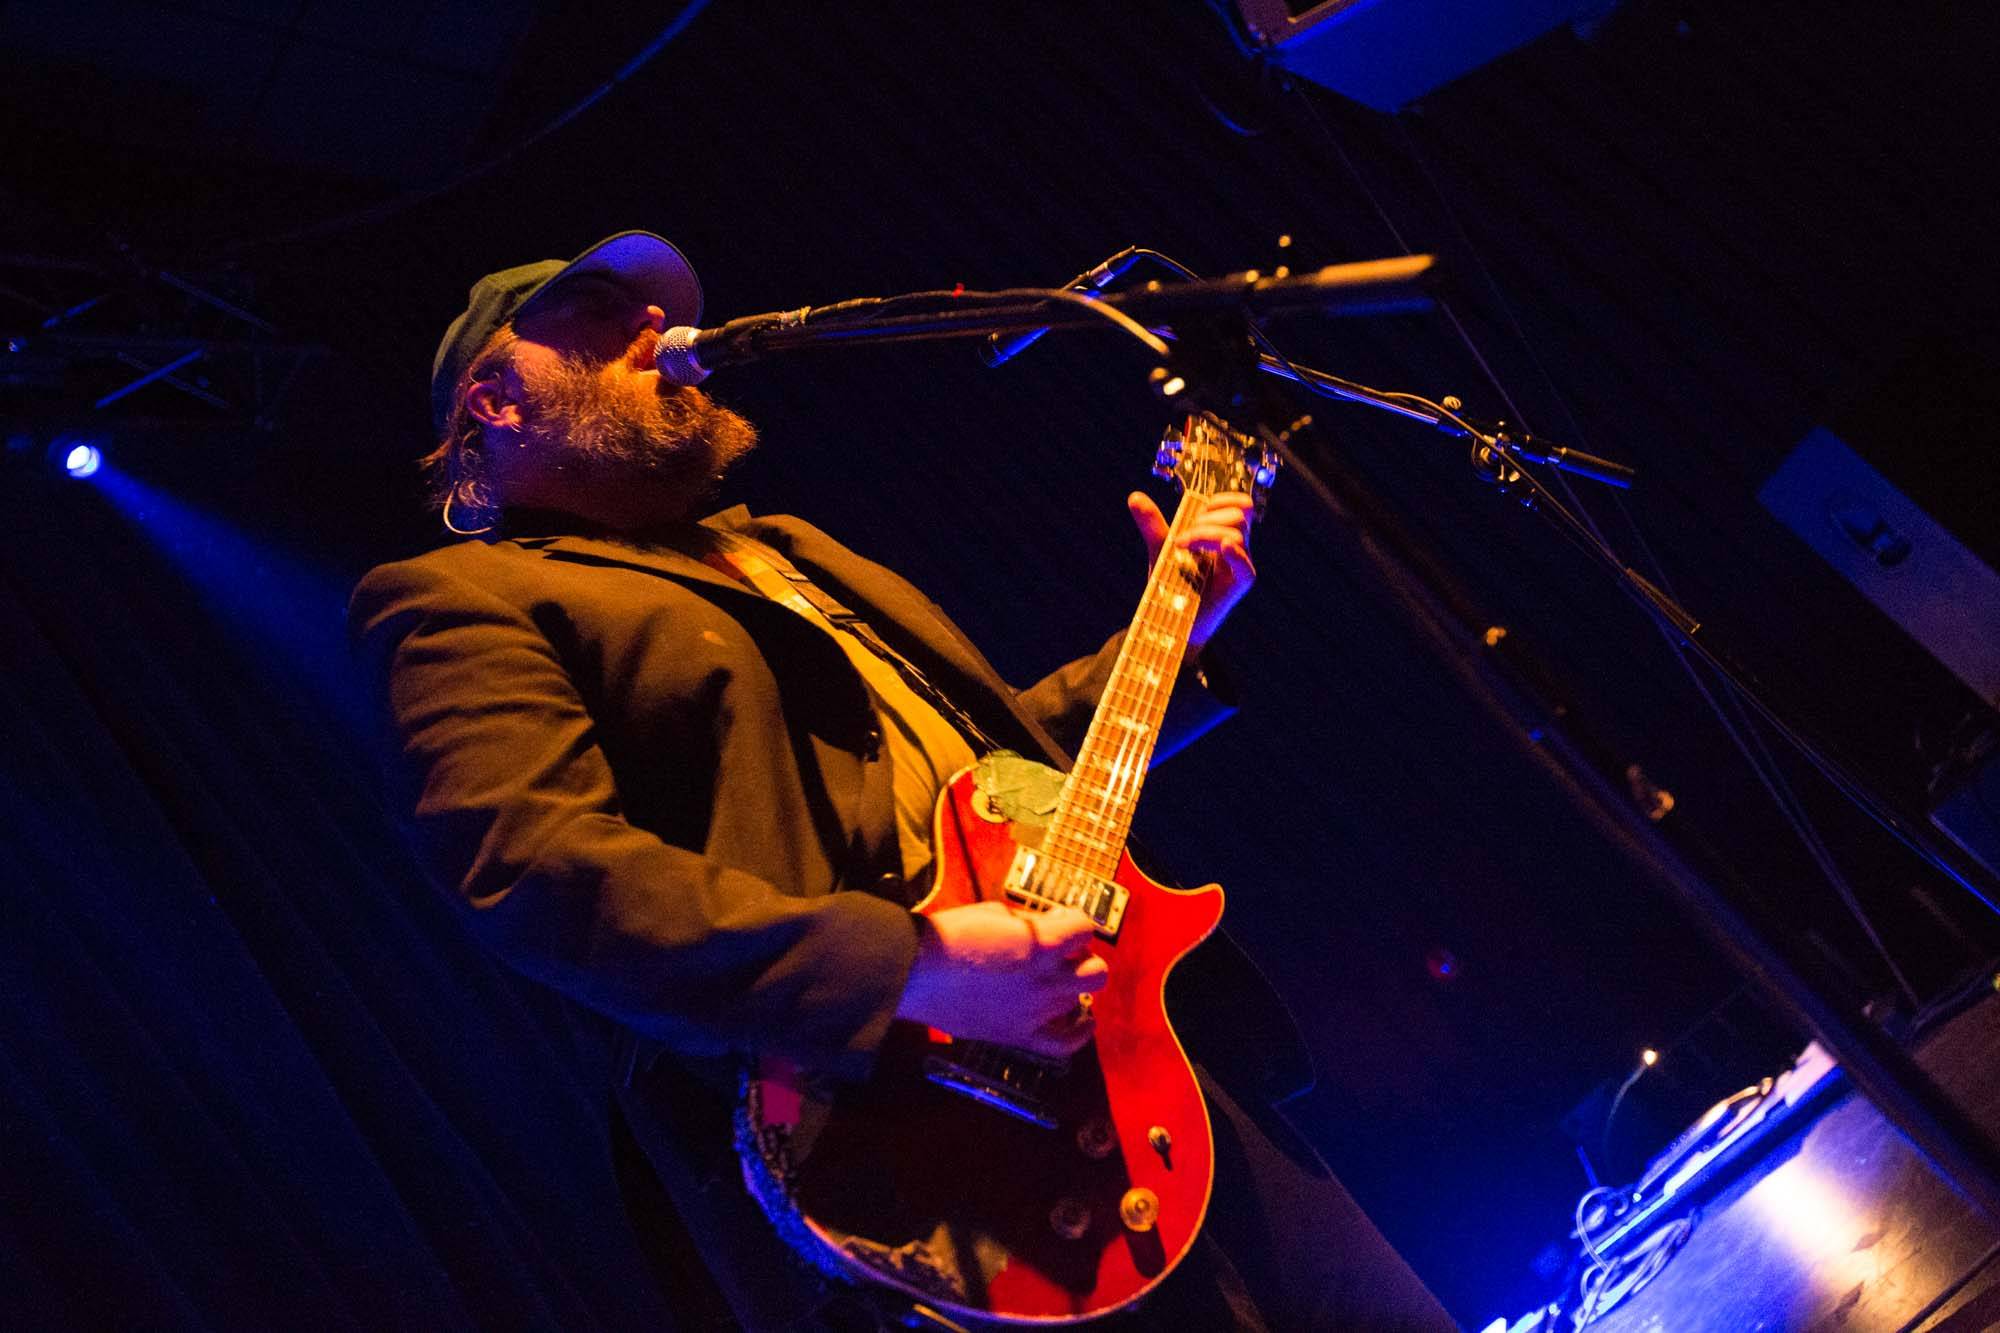 Pinback at the Imperial Theatre, Vancouver, Sept. 27 2014. Kirk Chantraine photo.